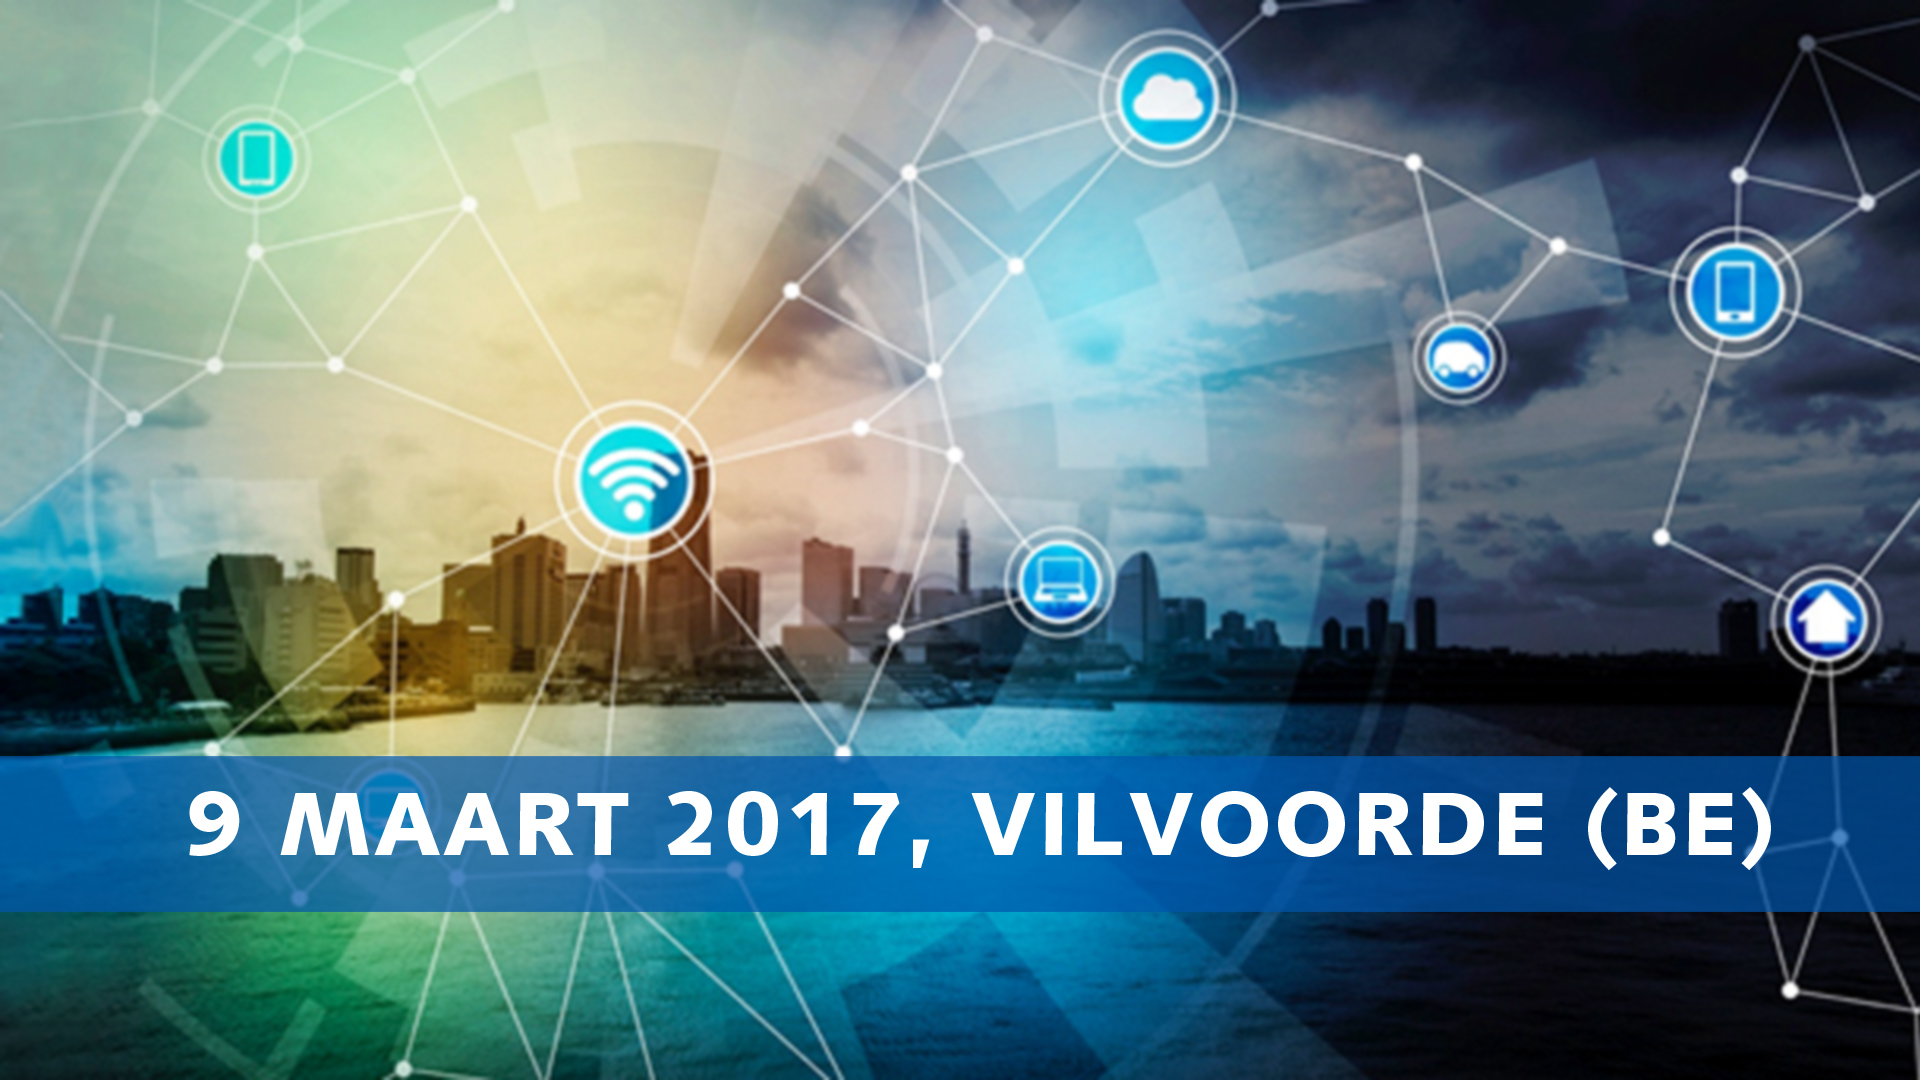 Managed 3G/4G Industriële IoT Solutions – 9 maart 2017, Vilvoorde | Pushing the limits of communication technology | MCS